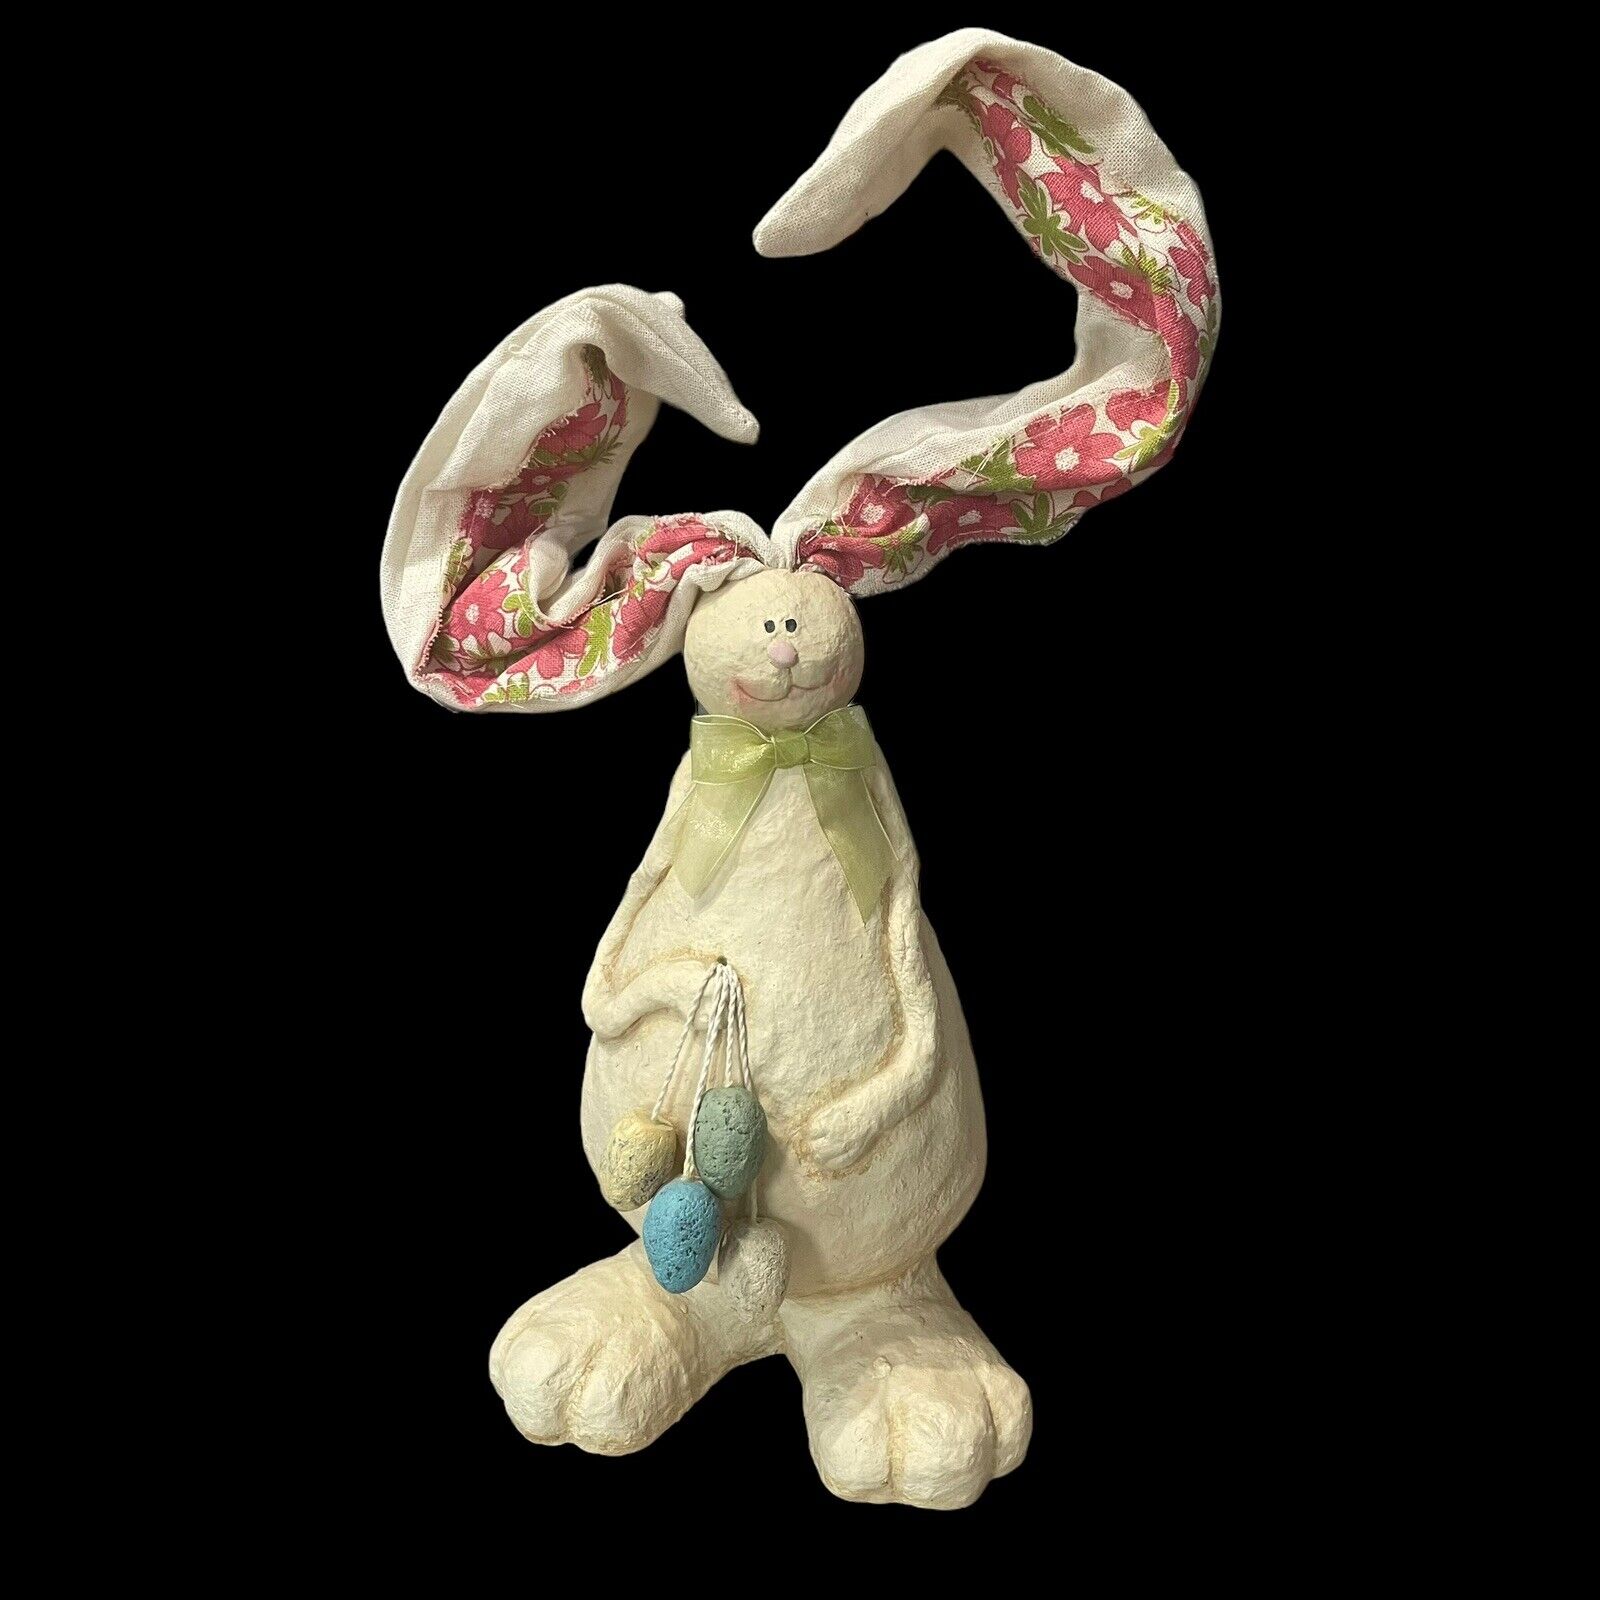 EASTER Vintage Paper Mache Easter Bunny Rabbit Giant Ears Carrying Eggs